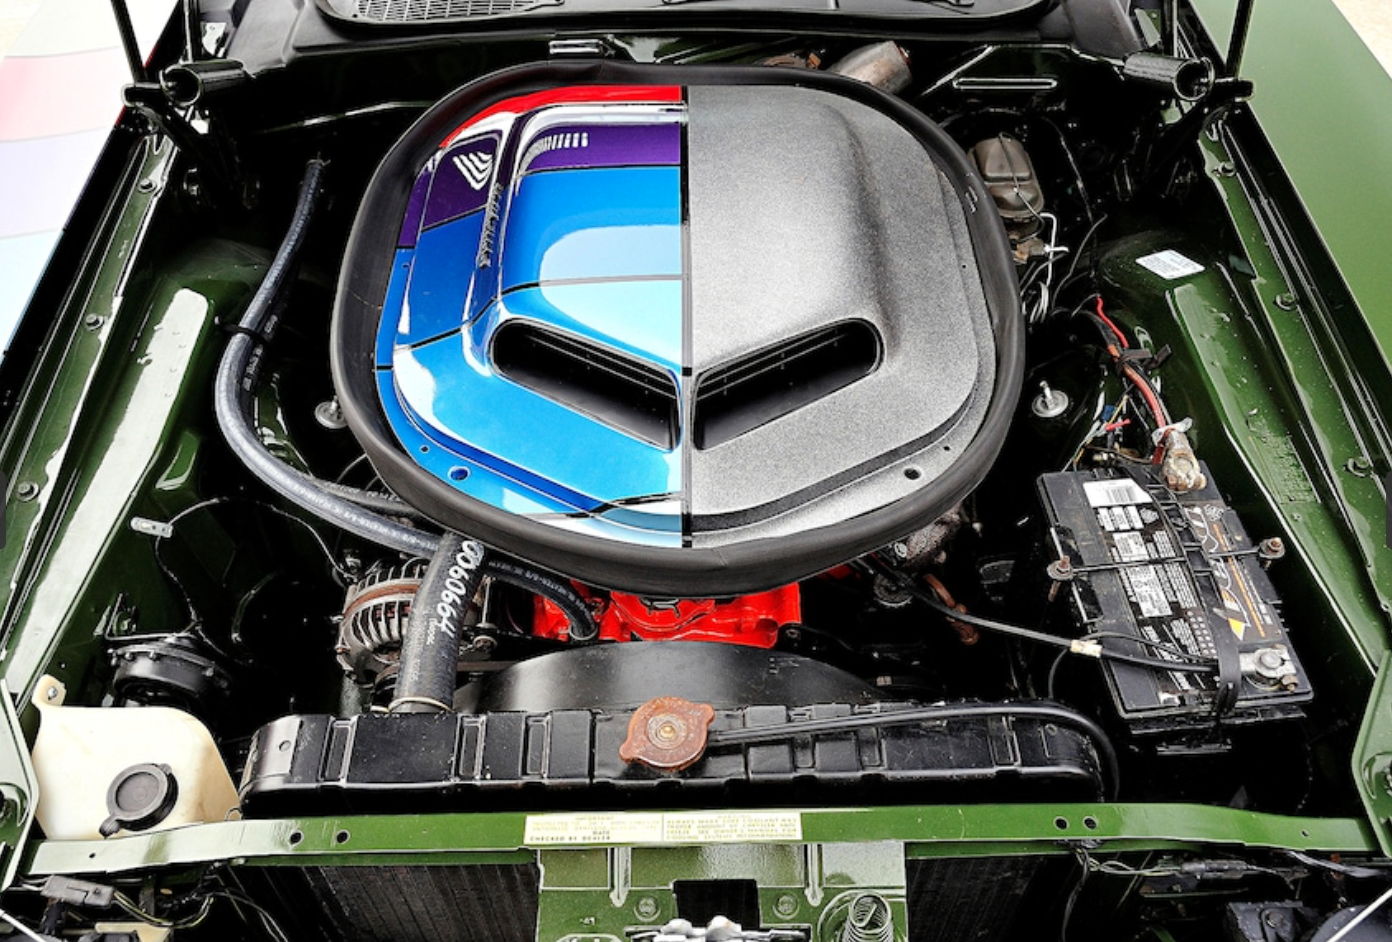 <img src="cuda-engine.png" alt="The half-painted shaker on the paint-chip '70 Plymouth Barracuda">